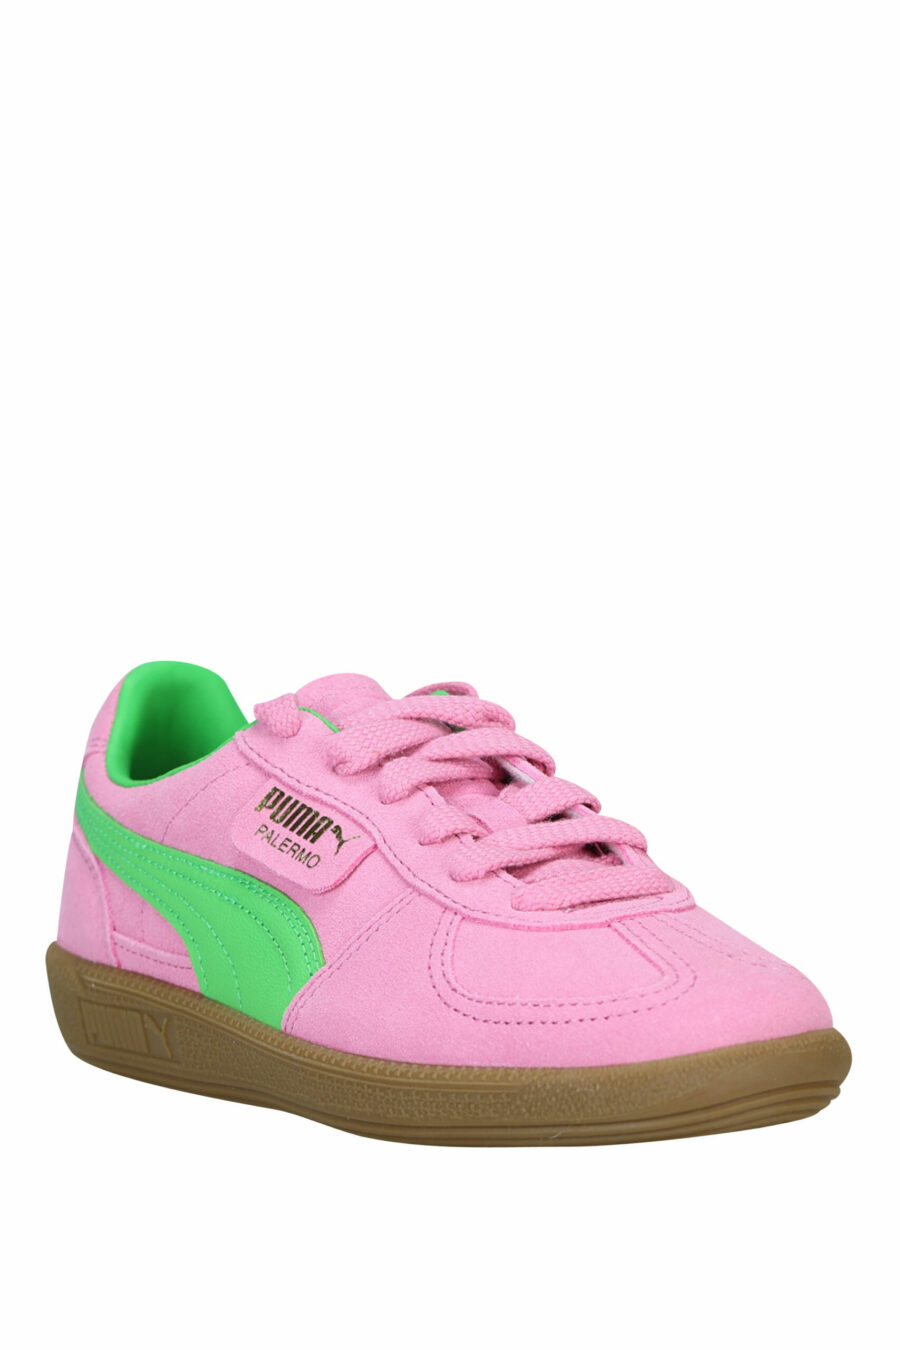 Trainers "palermo" fuchsia with green - 4099685699247 1 scaled